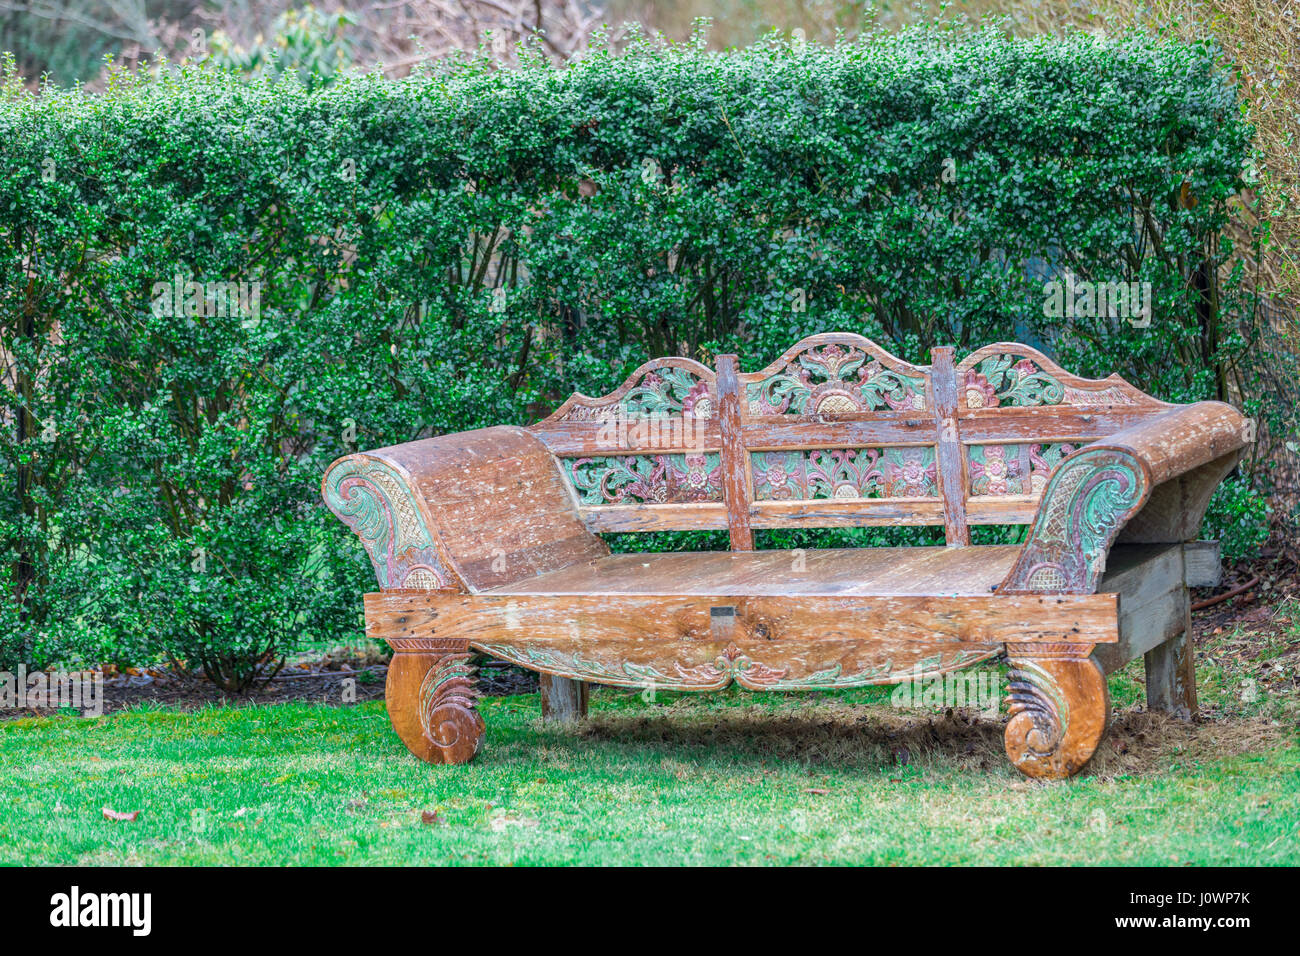 ornate decorative bench from the far east in a yard Stock Photo